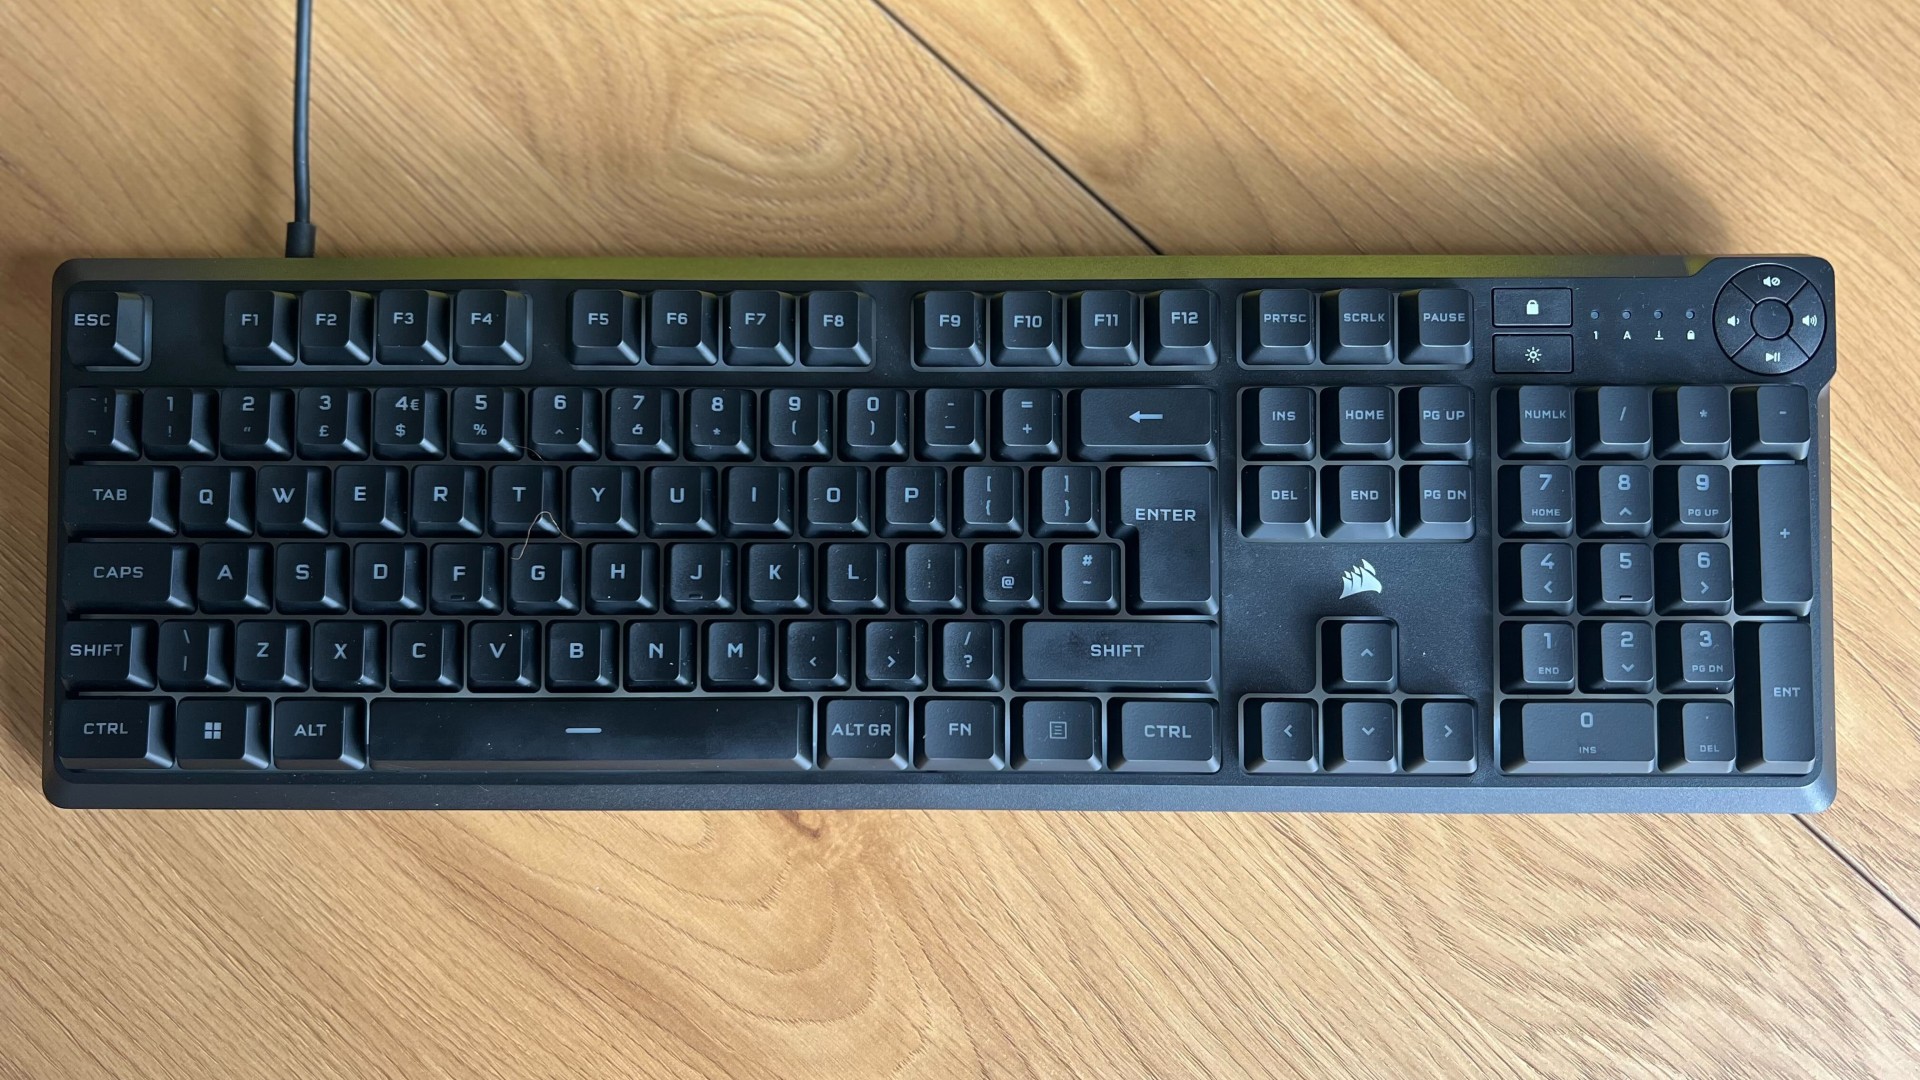 Corsair K55 Core review – a solid choice for a budget gaming keyboard